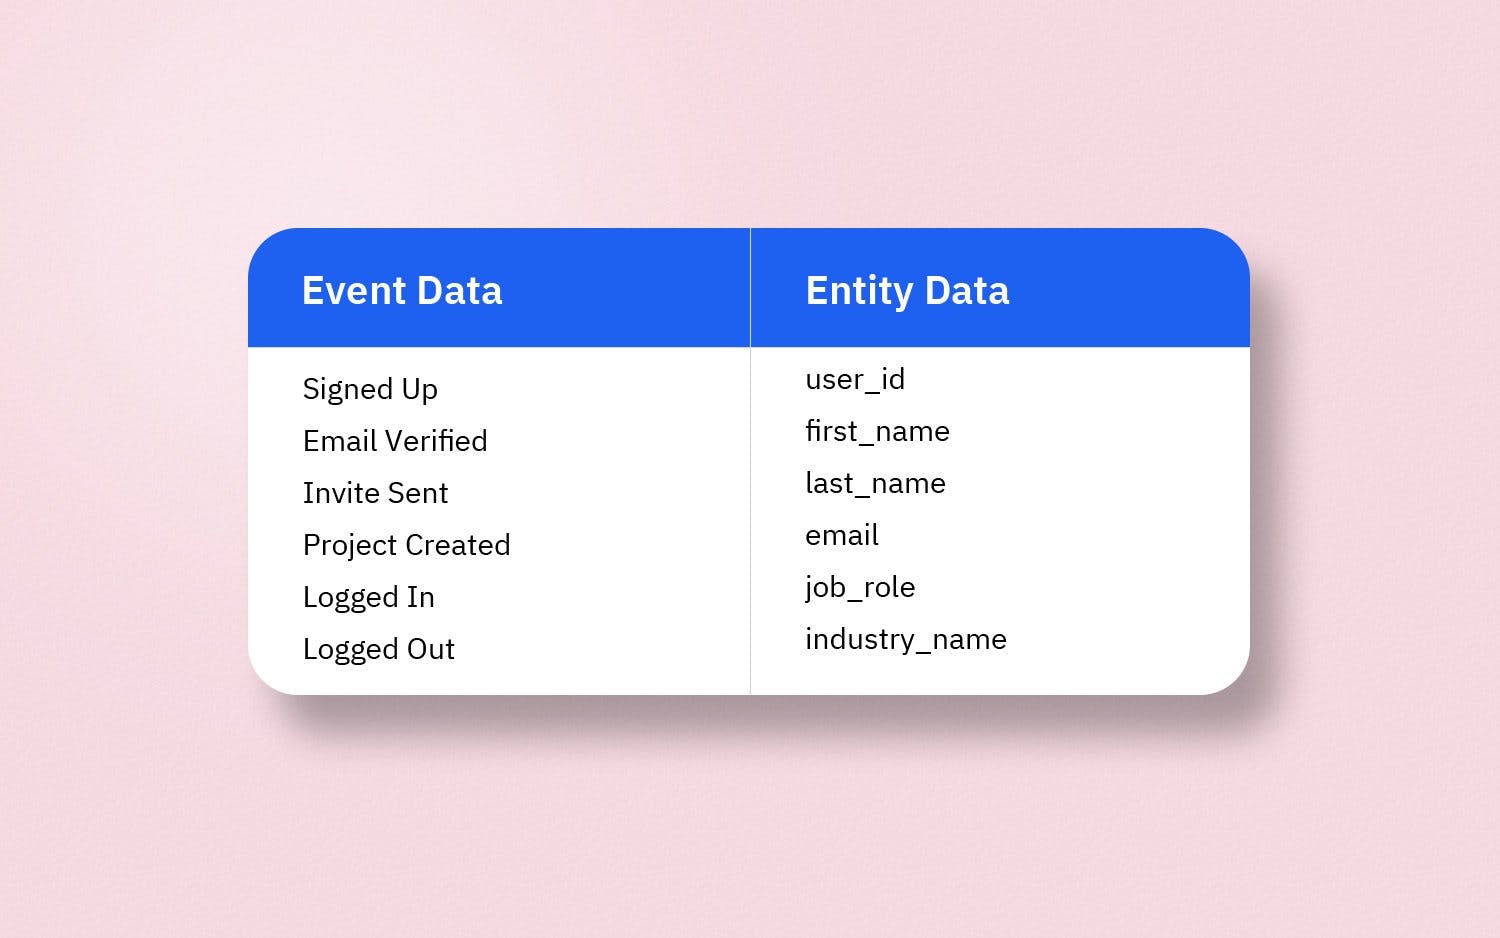 Event data components